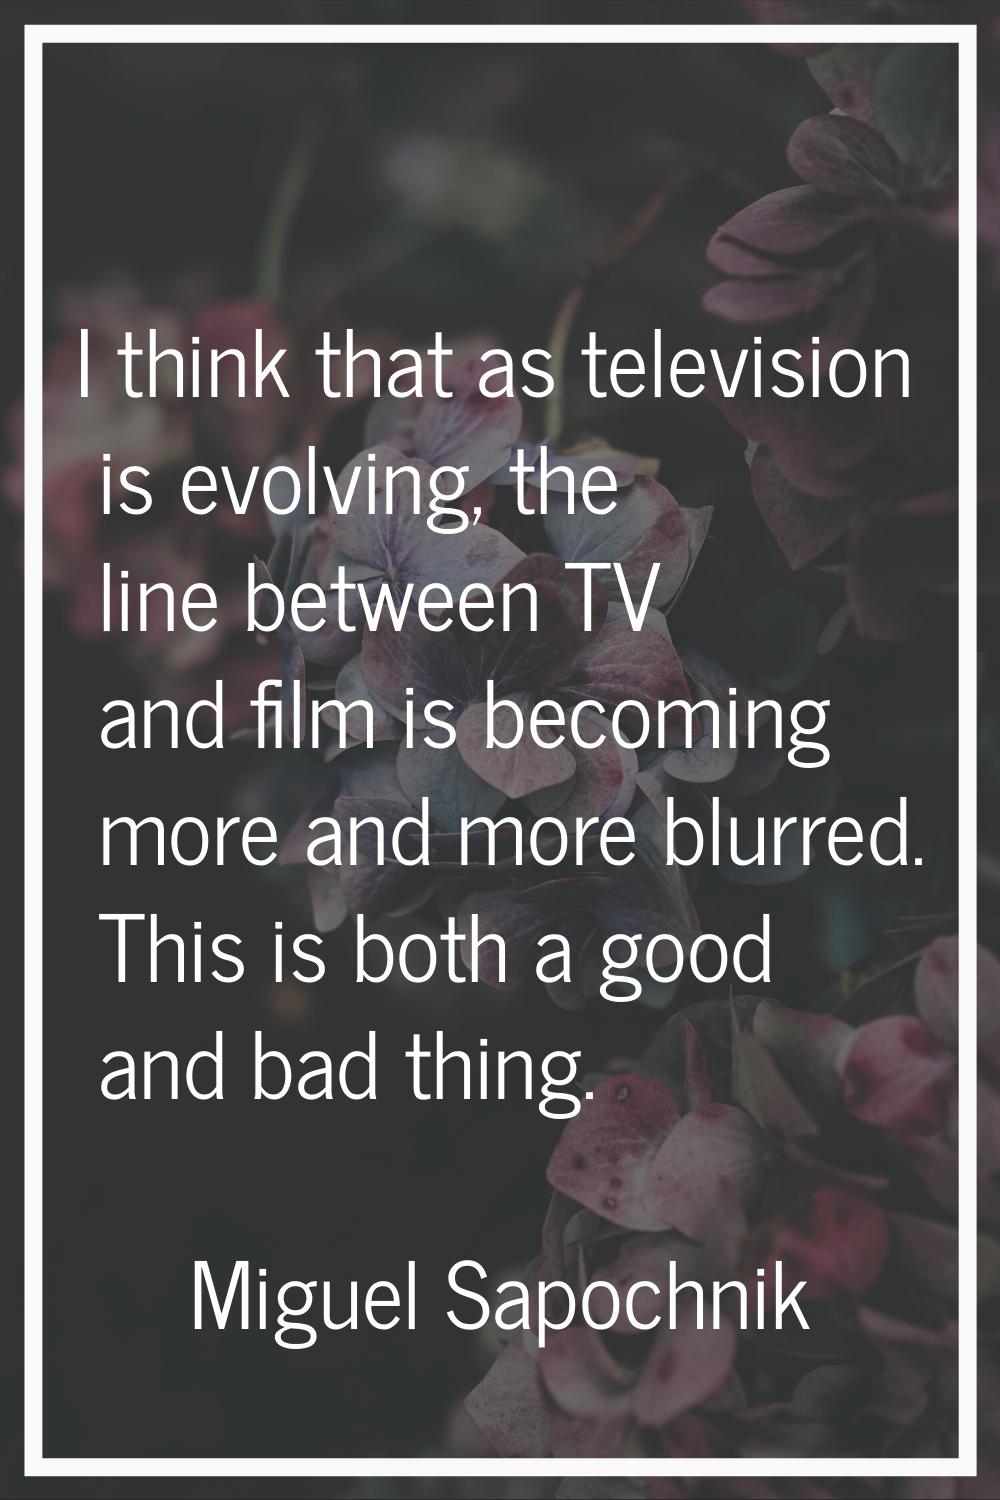 I think that as television is evolving, the line between TV and film is becoming more and more blur